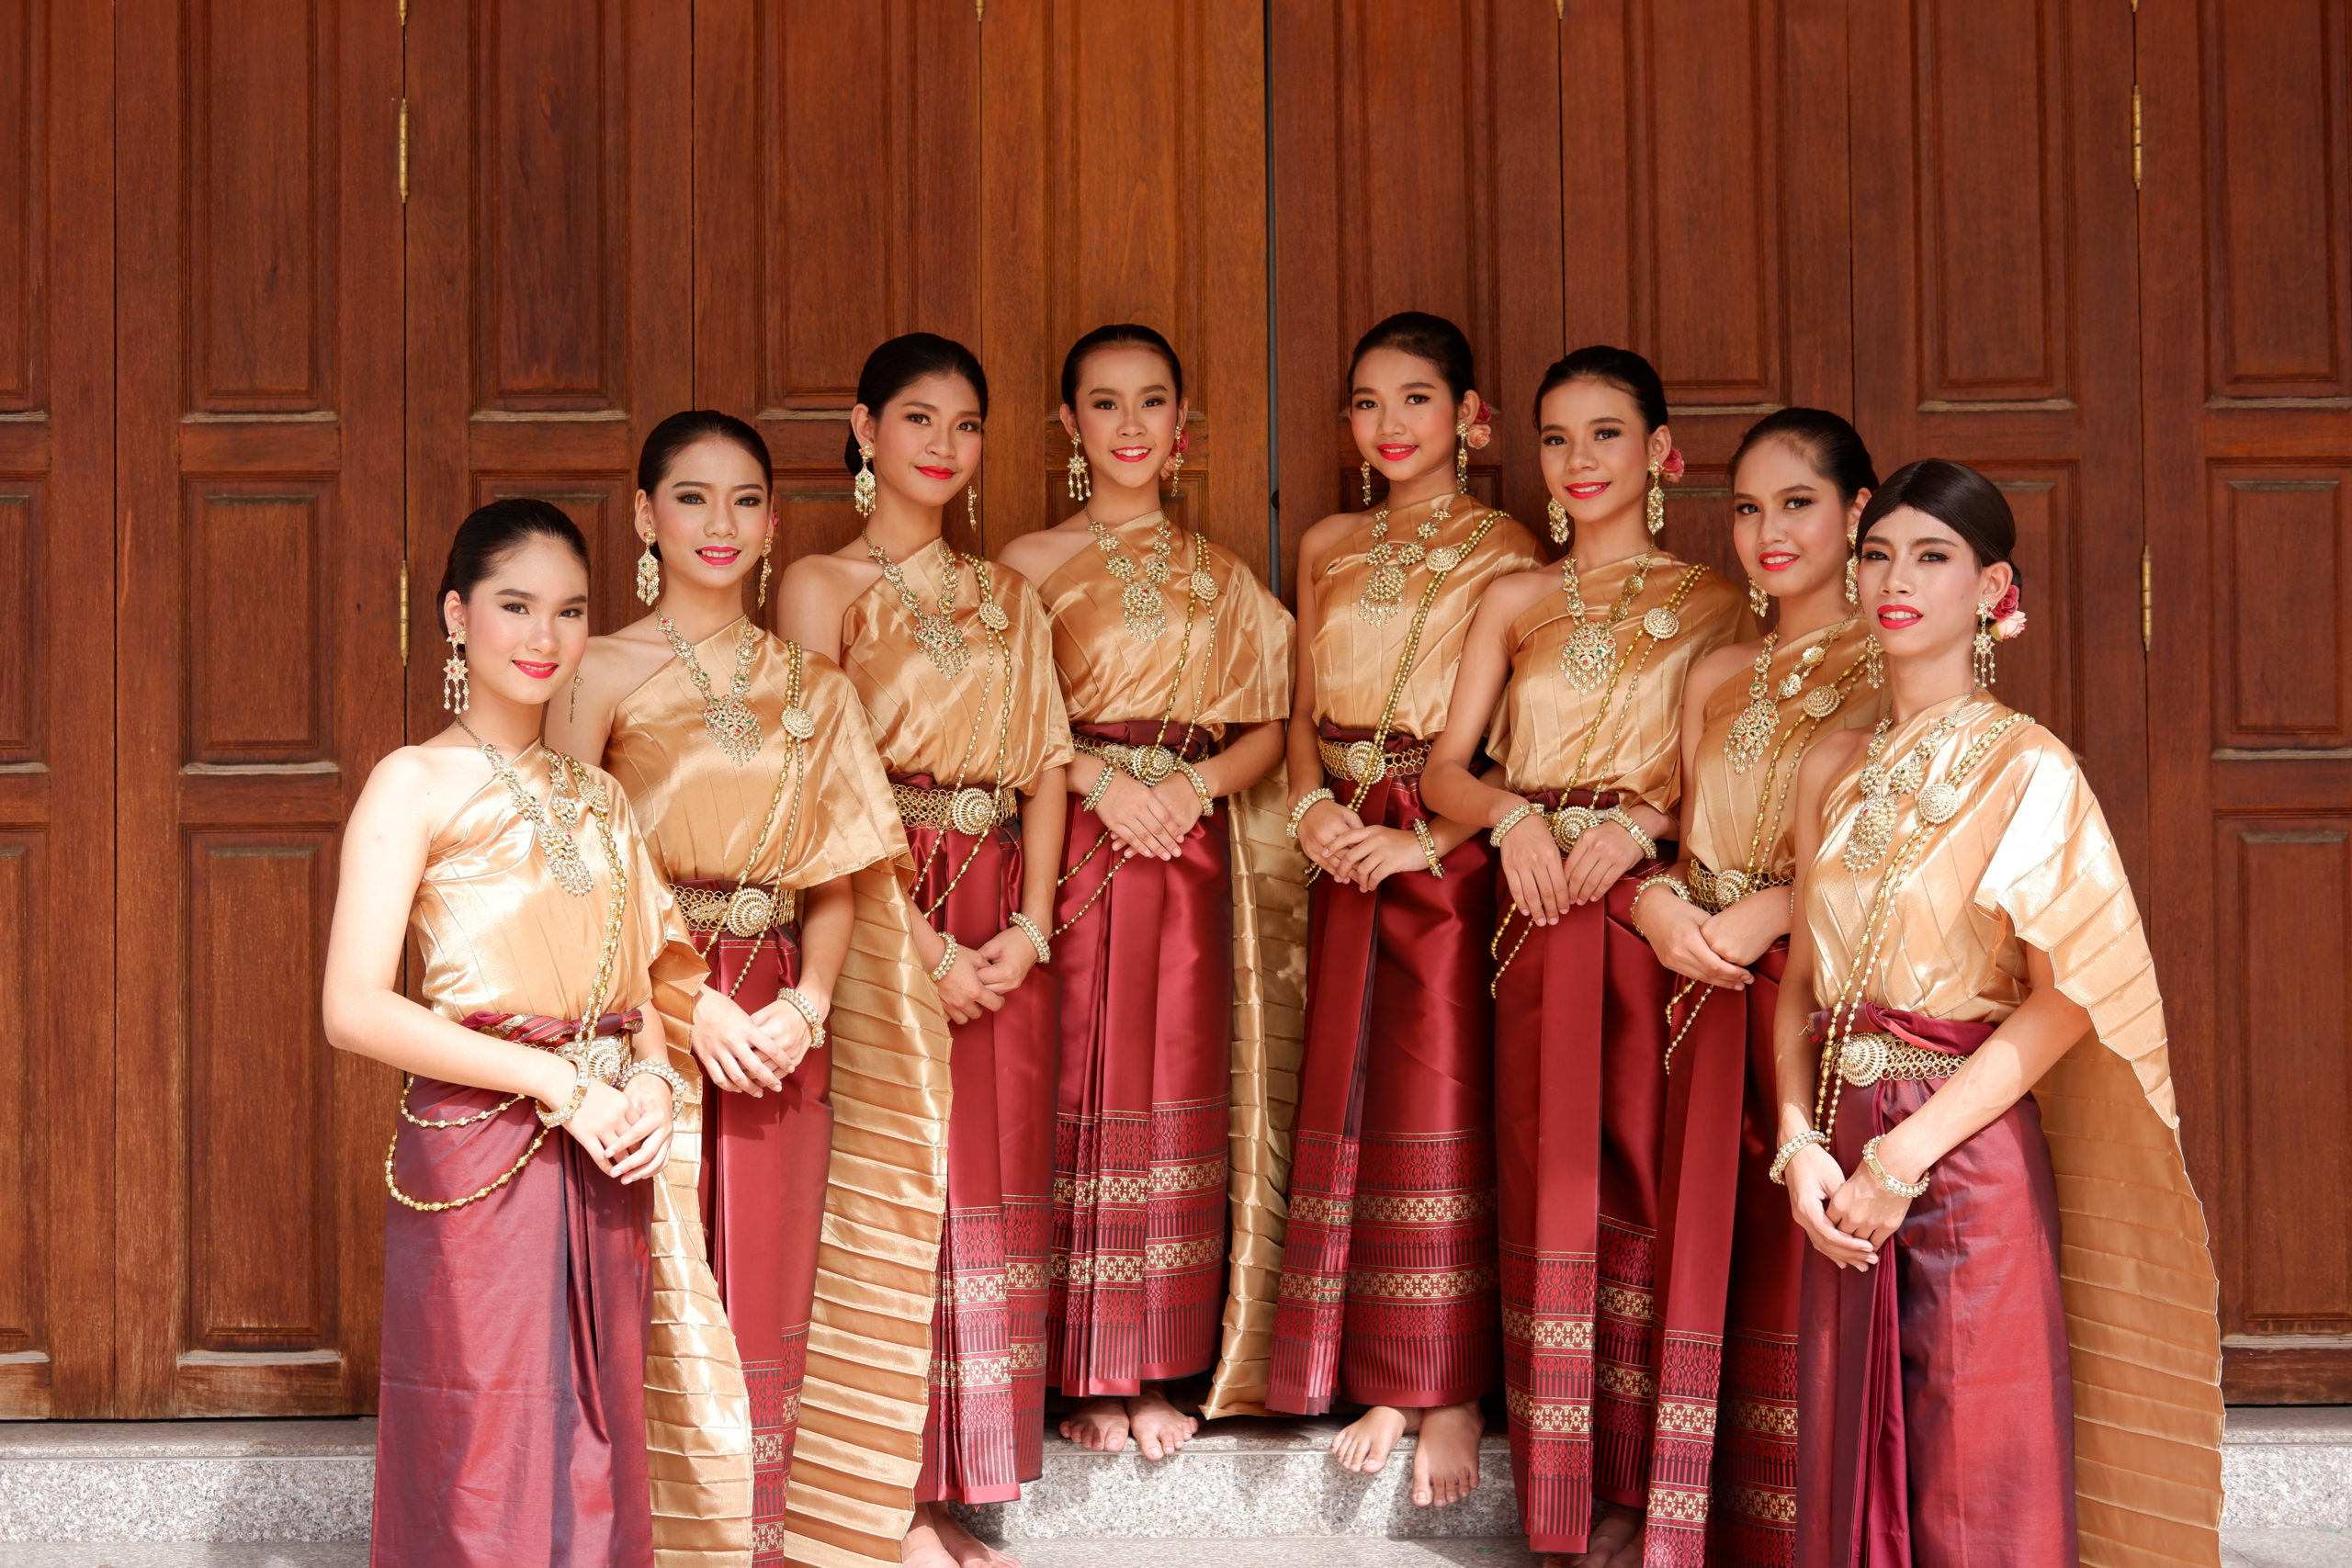 Discover traditional costumes in Asia